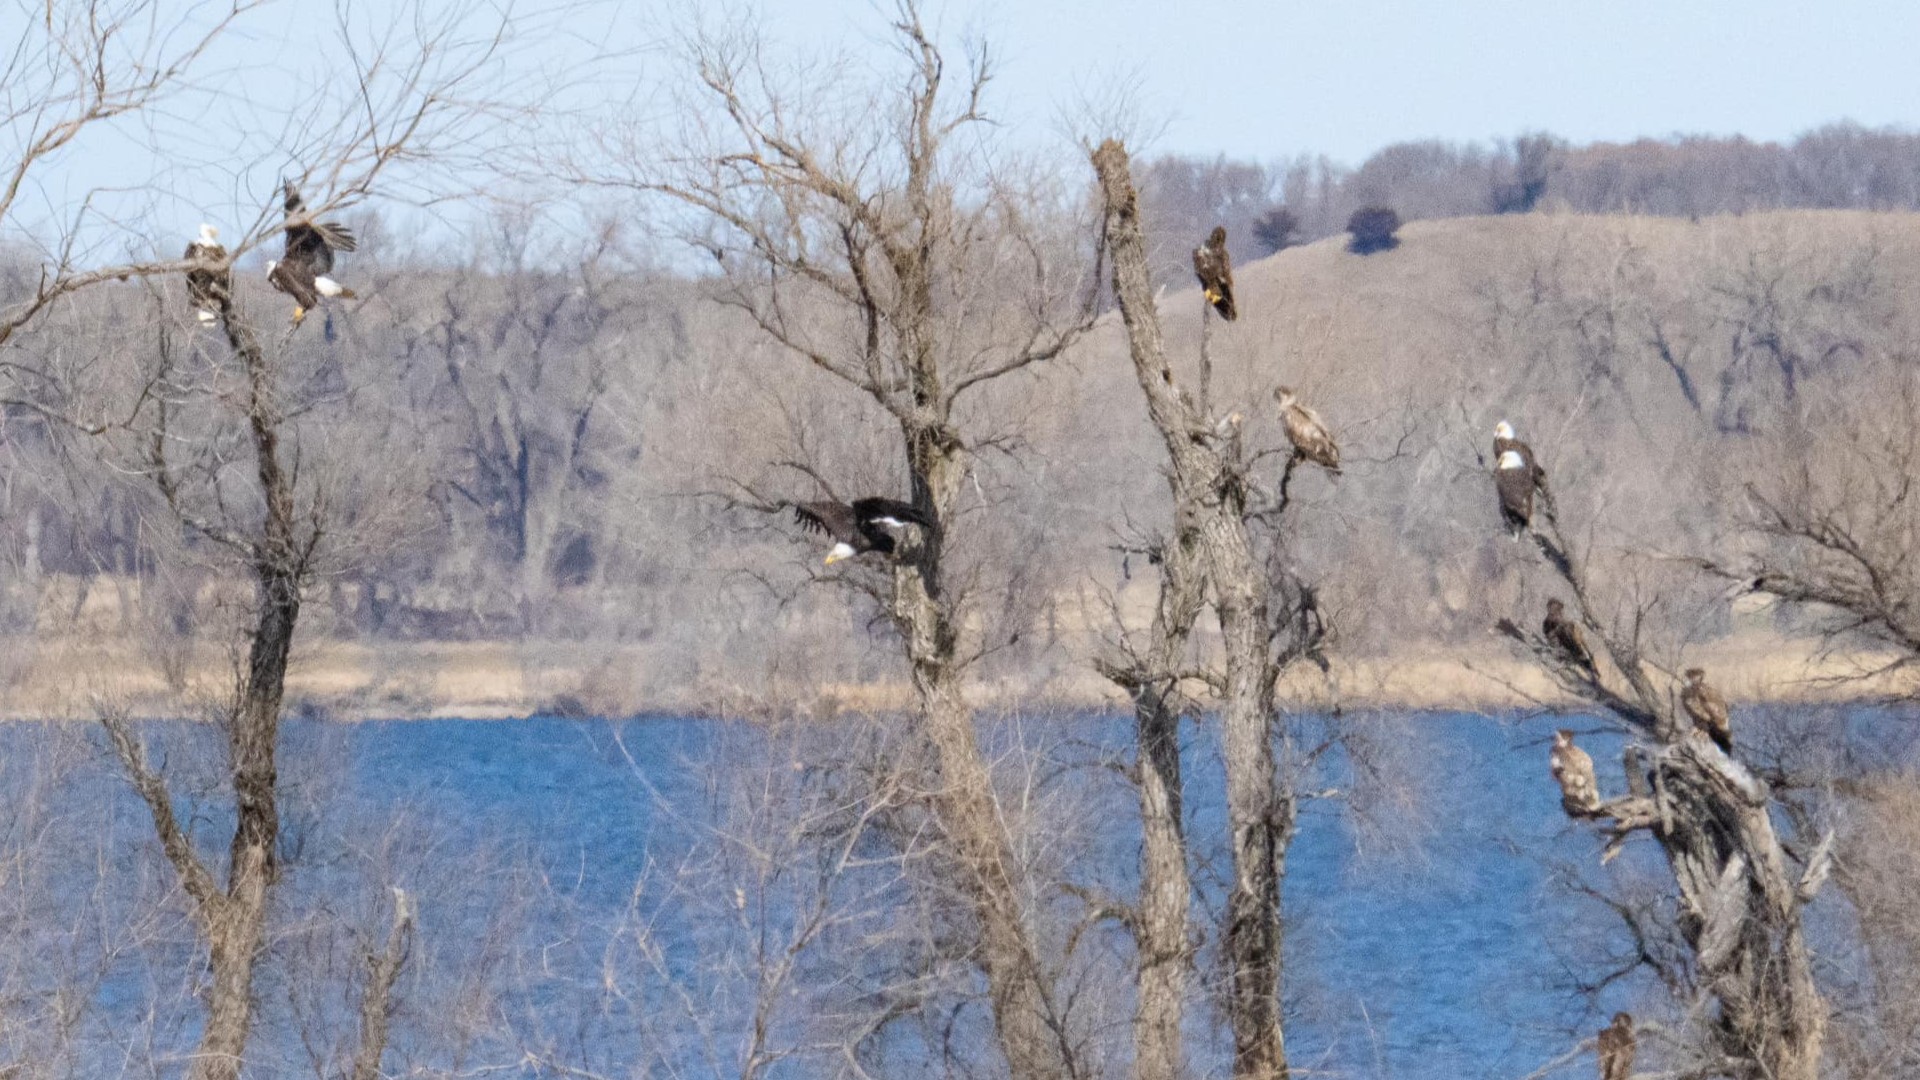 A major fish kill on Lake Traverse has drawn dozens of eagles in search of an all-you-can-eat buffet.